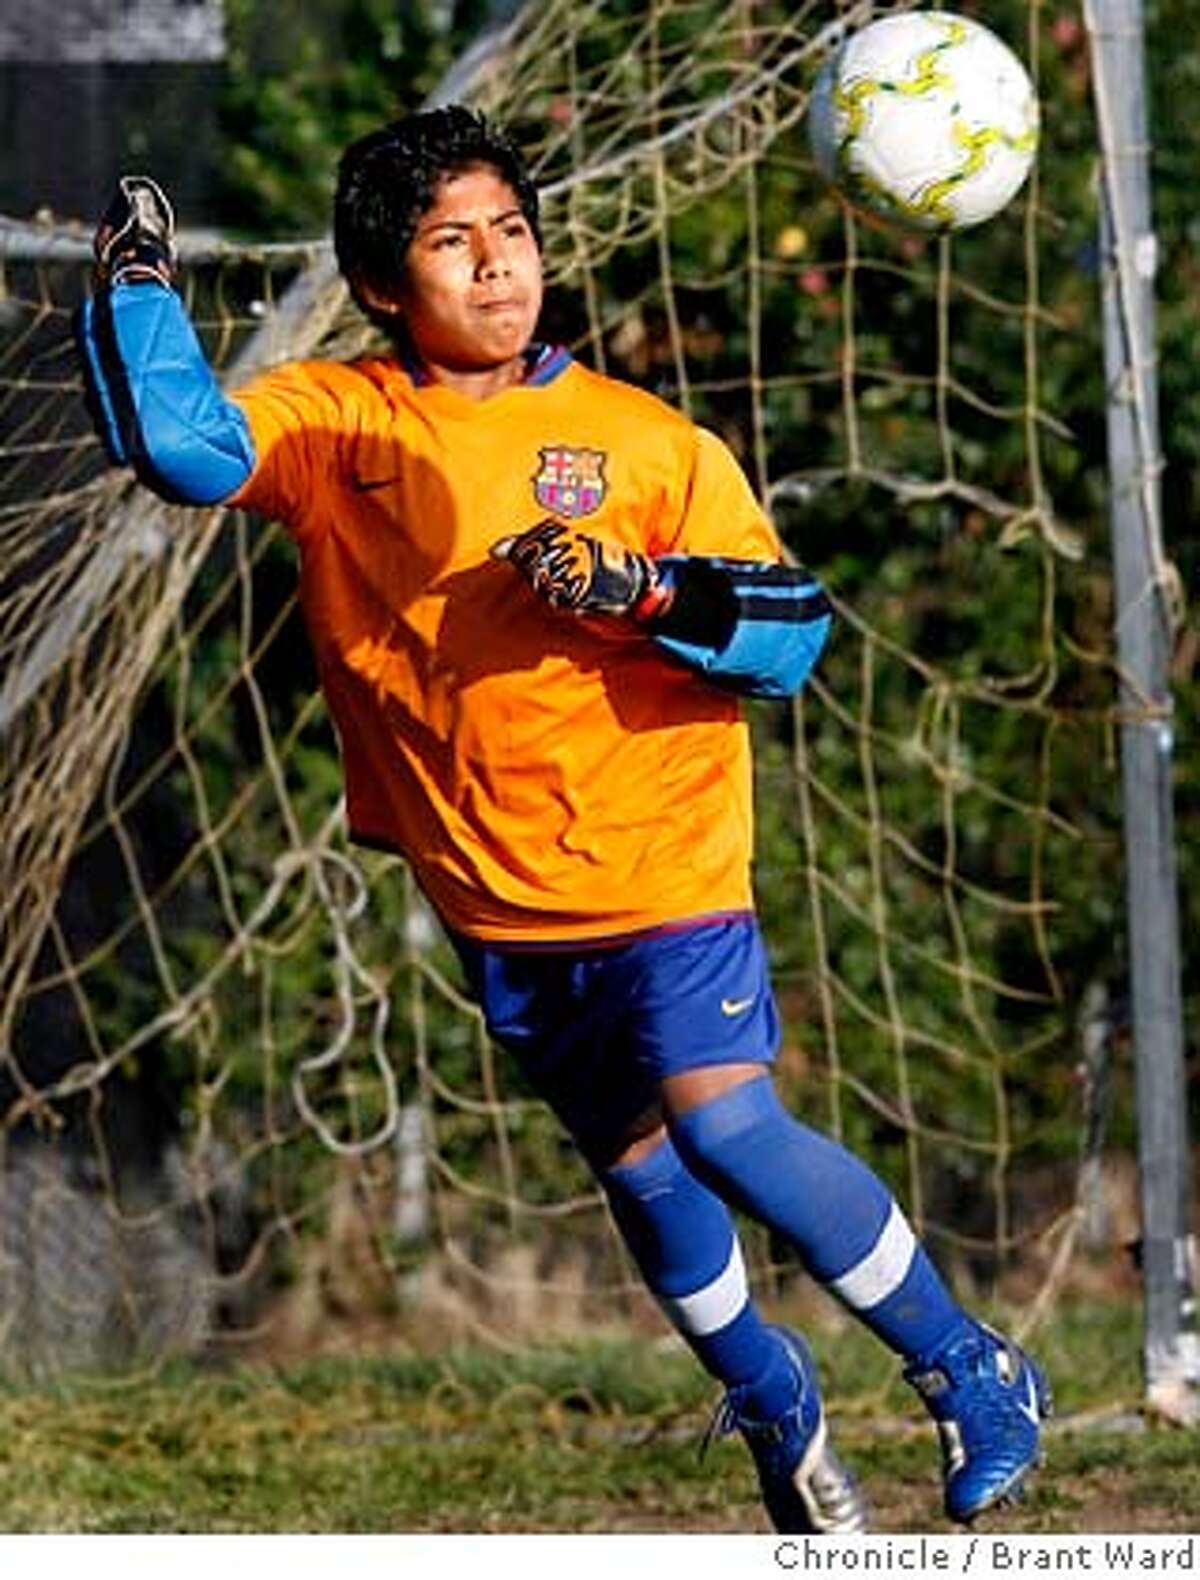 13 year old Francisco Mendoza plays goalie for his youth soccer team. He gets to go to the match Wednesday where he will root for his beloved Mexican Nationals. The Mexican National team has come to town for a match against Ecuador. Many will have to watch the game on television but a few lucky fans will get to attend the game Wednesday night. Youth soccer teams were practicing at Lazear Field Tuesday night...everyone was looking forward to the game. {Brant Ward/San Francisco Chronicle}3/27/07